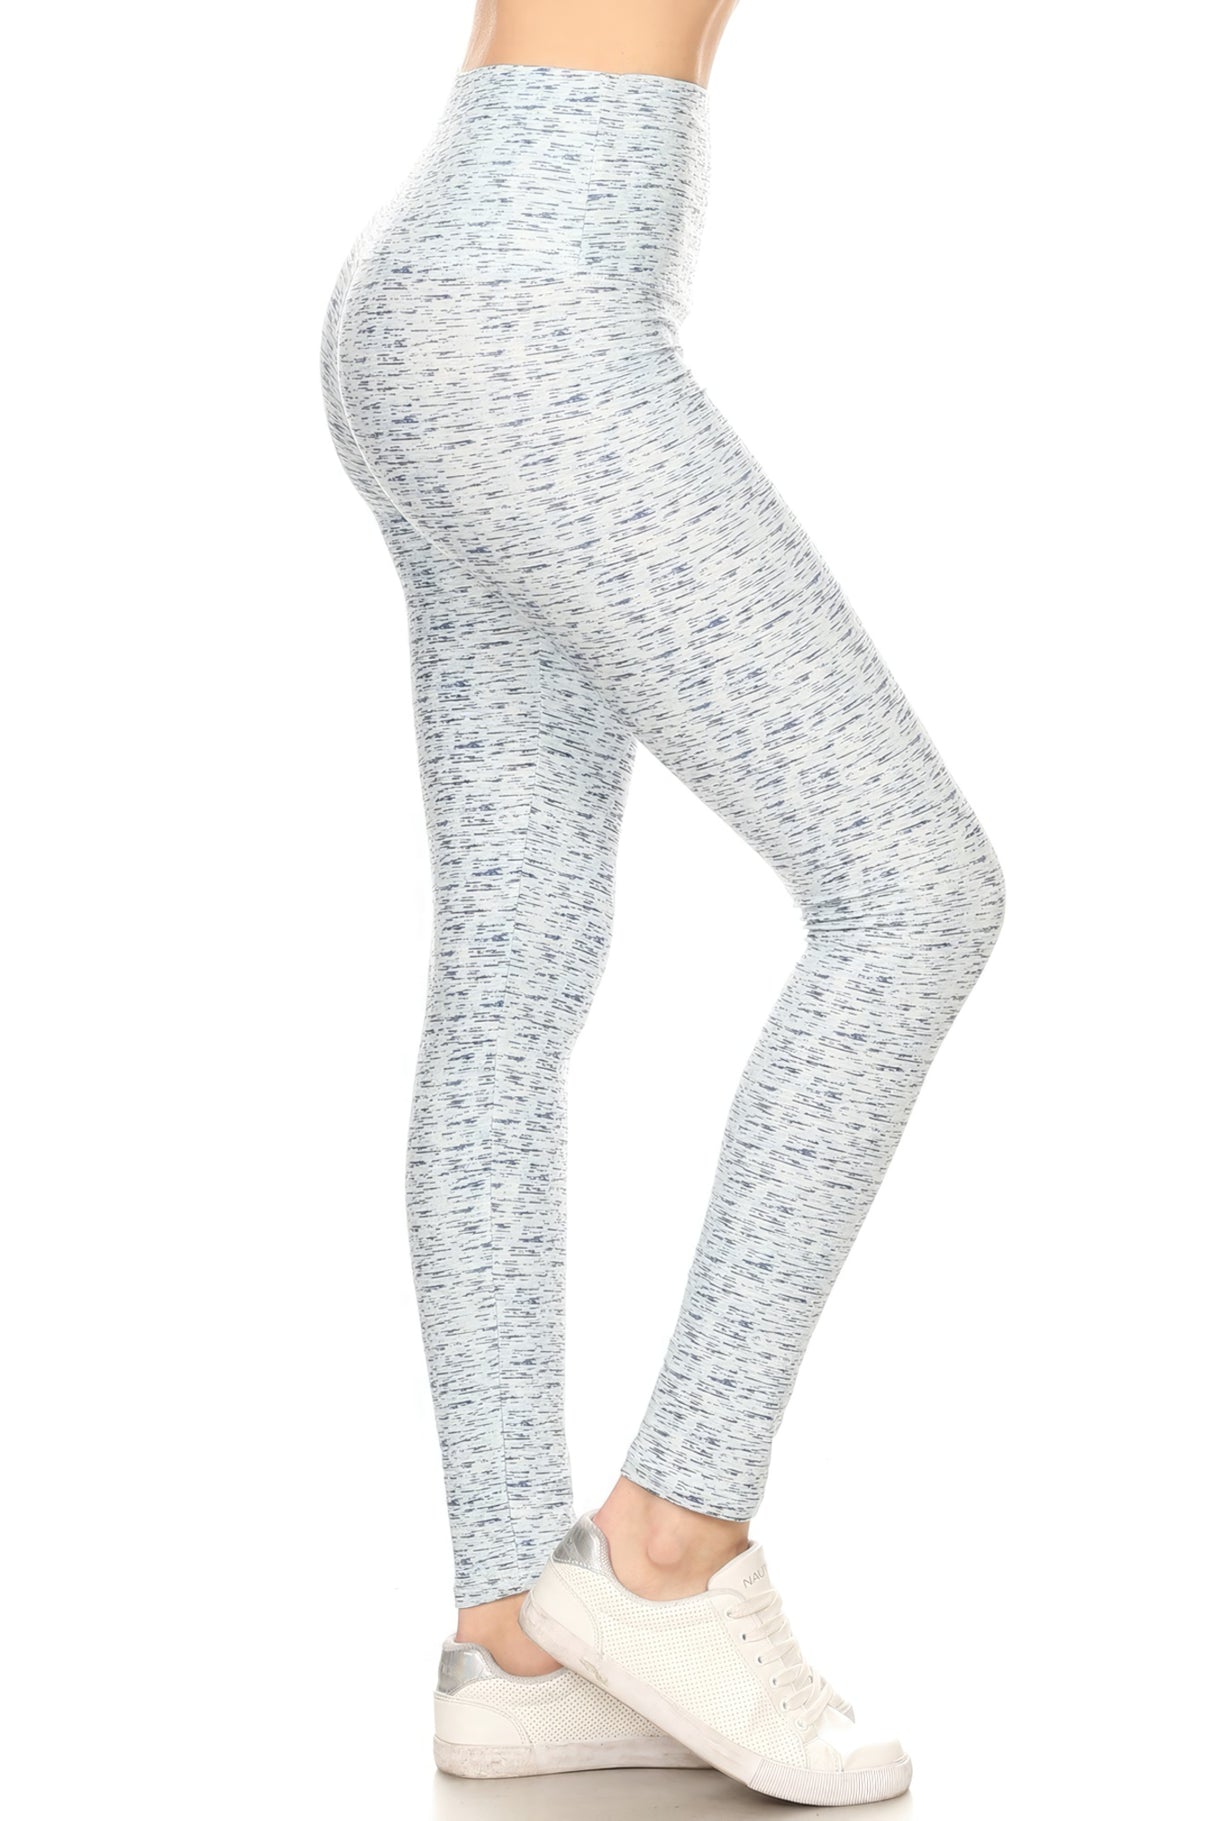 5-inch Long Yoga Style Banded Lined Multi Printed Knit Legging With High Waist - White